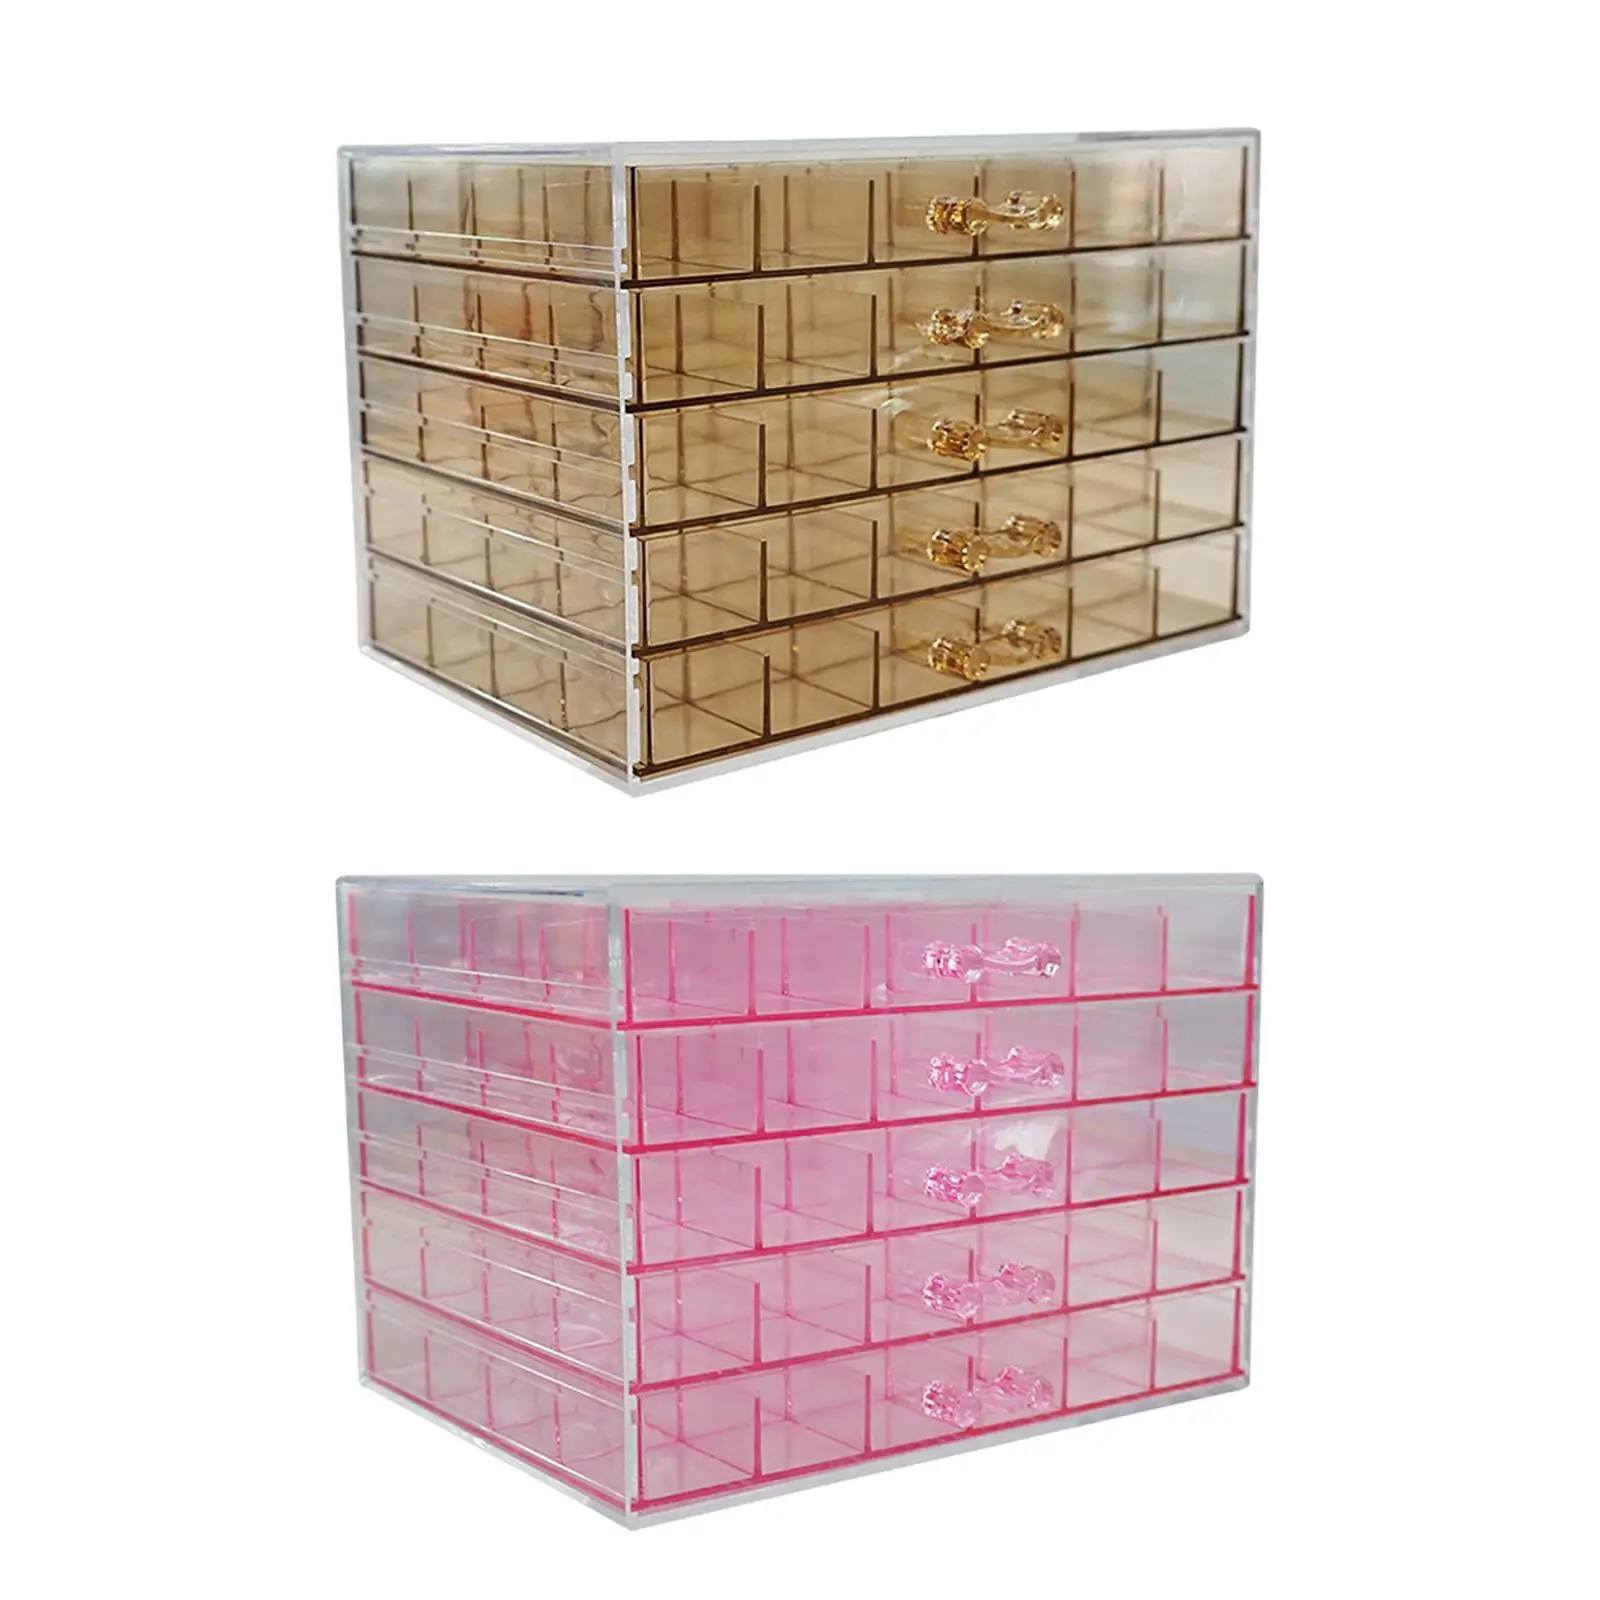 Acrylic Jewelry Storage Box Holder Empty Drawer Clear 120 Small Compartments Desktop Jewelry Organizer Box Nail Tip Display Case